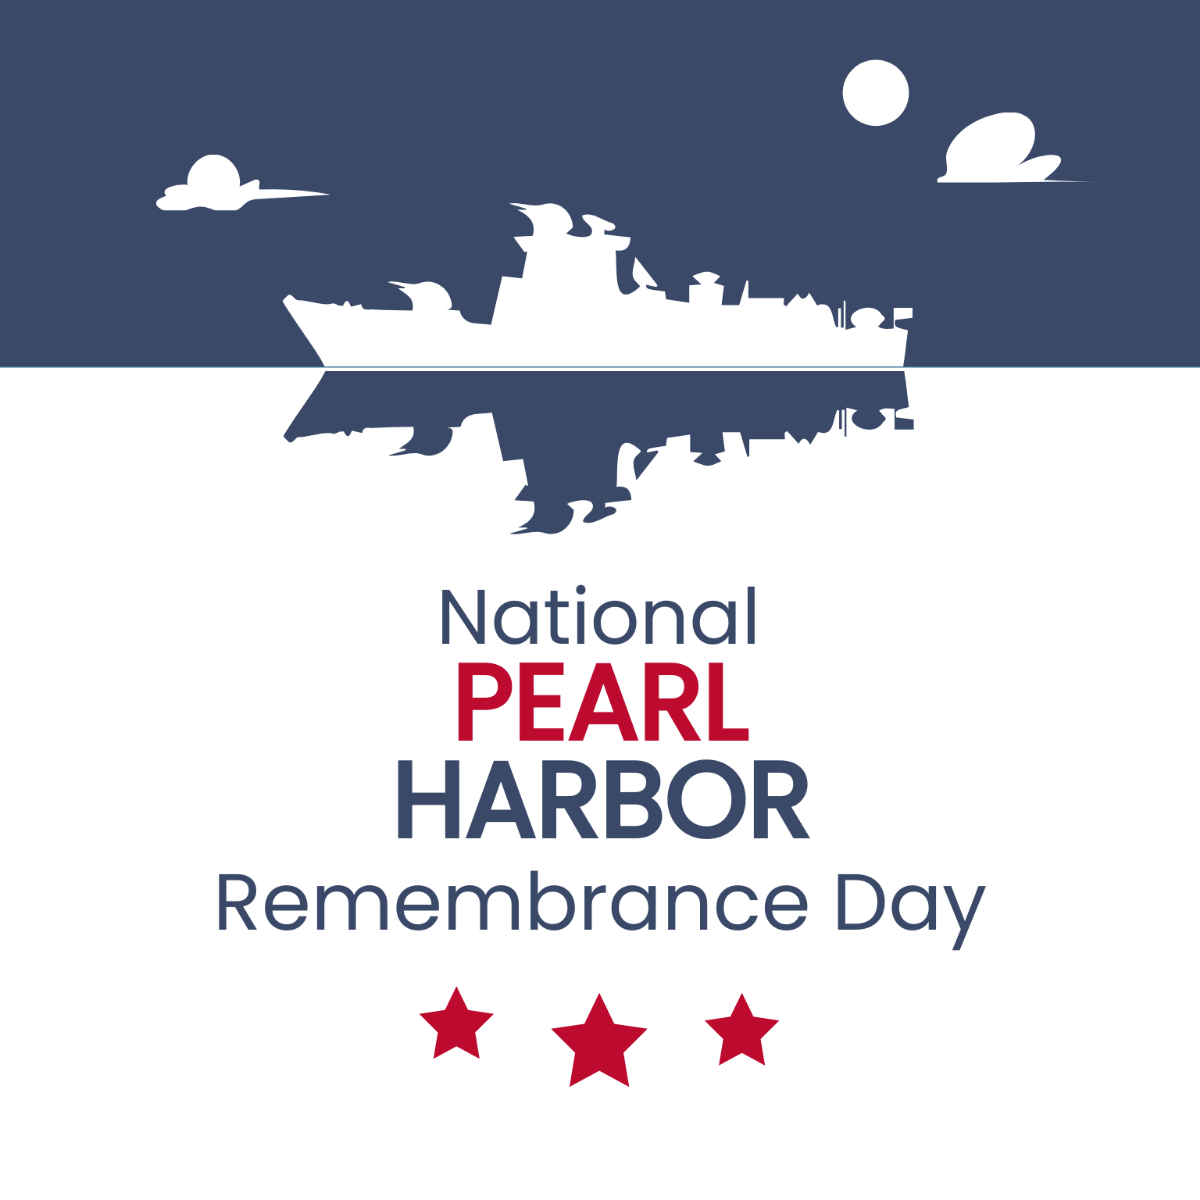 Free National Pearl Harbor Remembrance Day Poster Vector Template